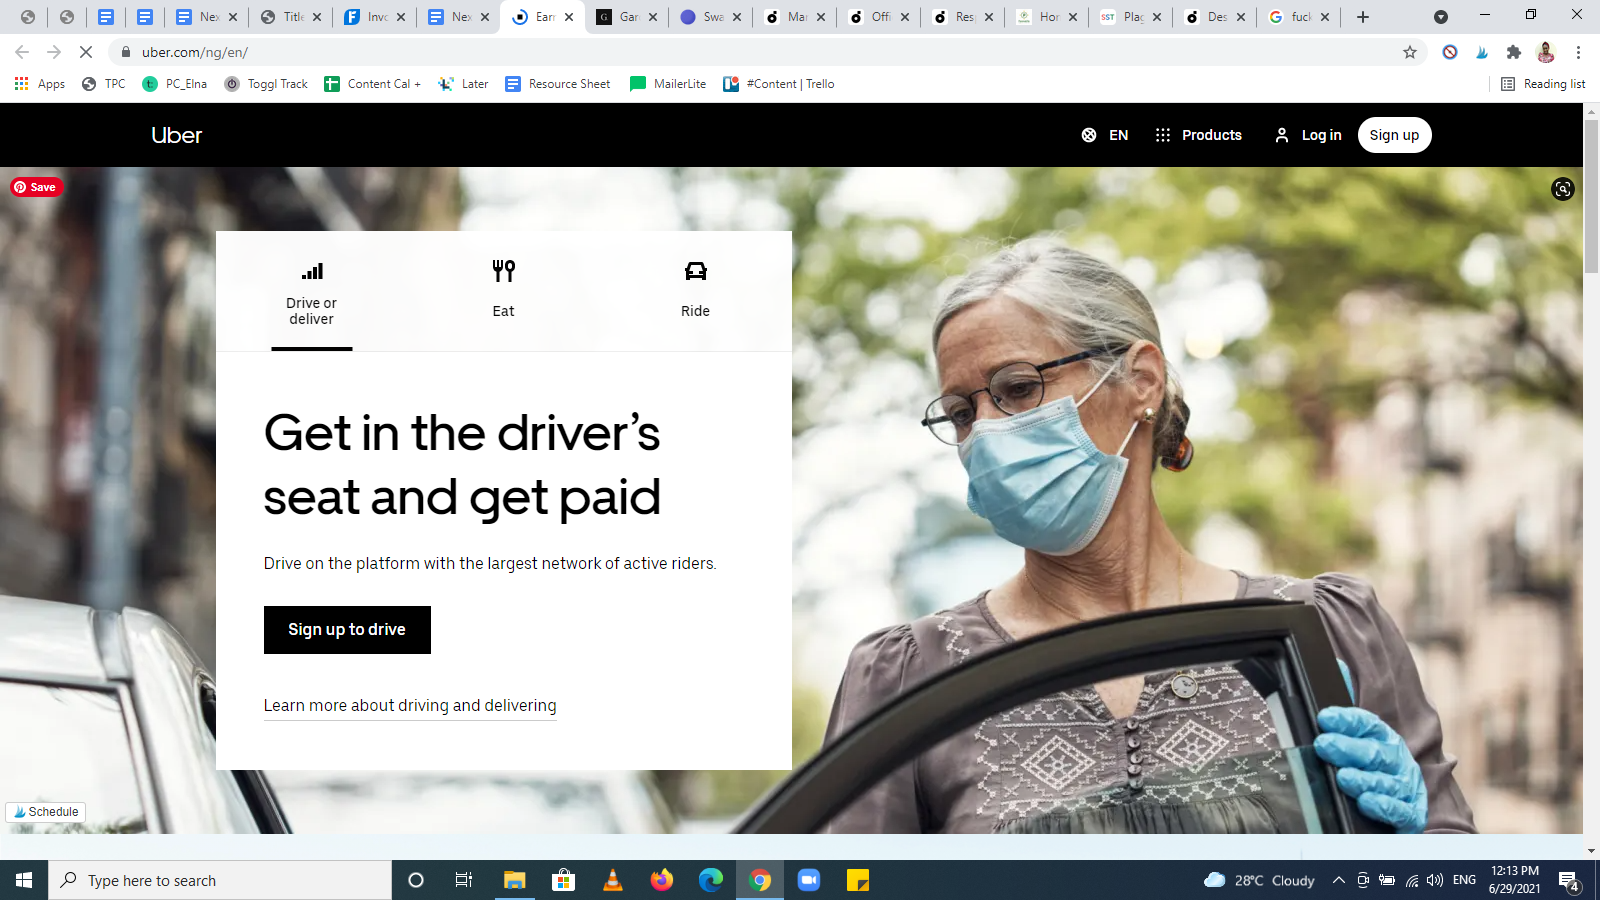 Uber’s homepage examples